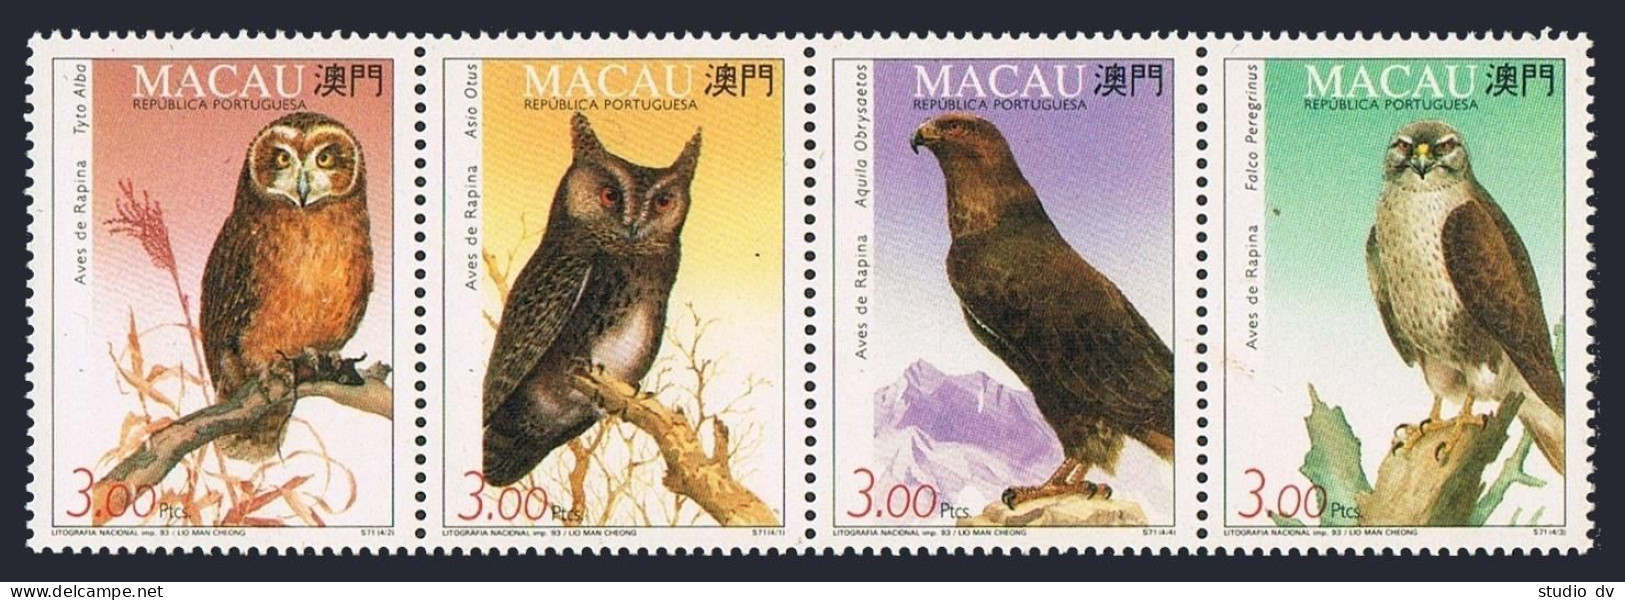 Macao 699-702a Strip, MNH. Michel 727-730. Birds 1993. Falcon, Aquila, Owls. - Unused Stamps